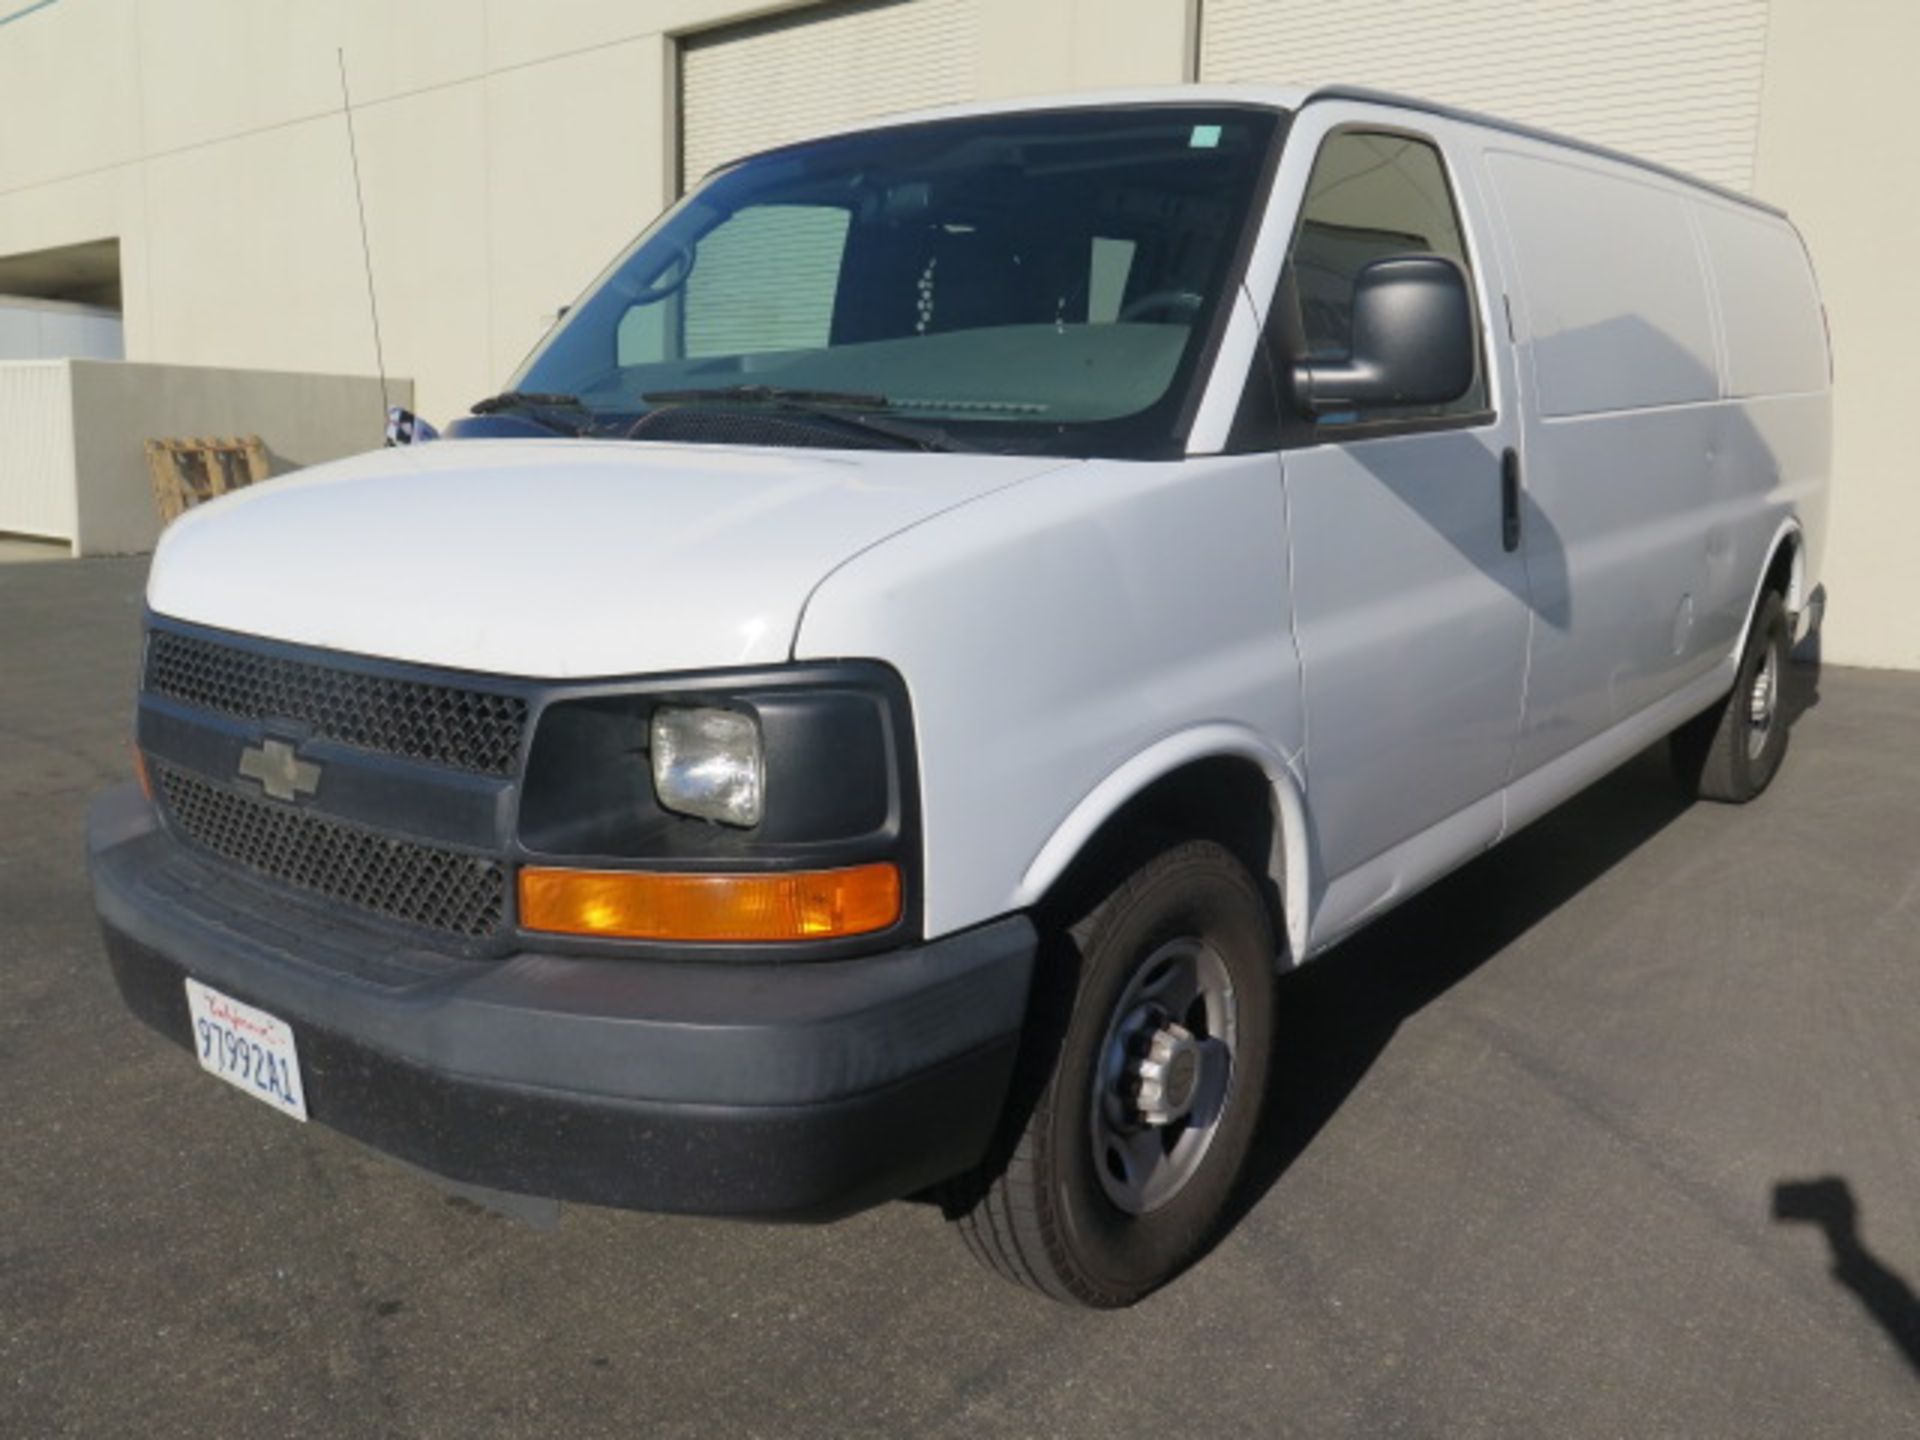 2007 Chevrolet Cargo Van Lisc #97992A1 w/Gas Engine, Auto Trans, AC, 271,713 Miles, SOLD AS IS - Image 3 of 24